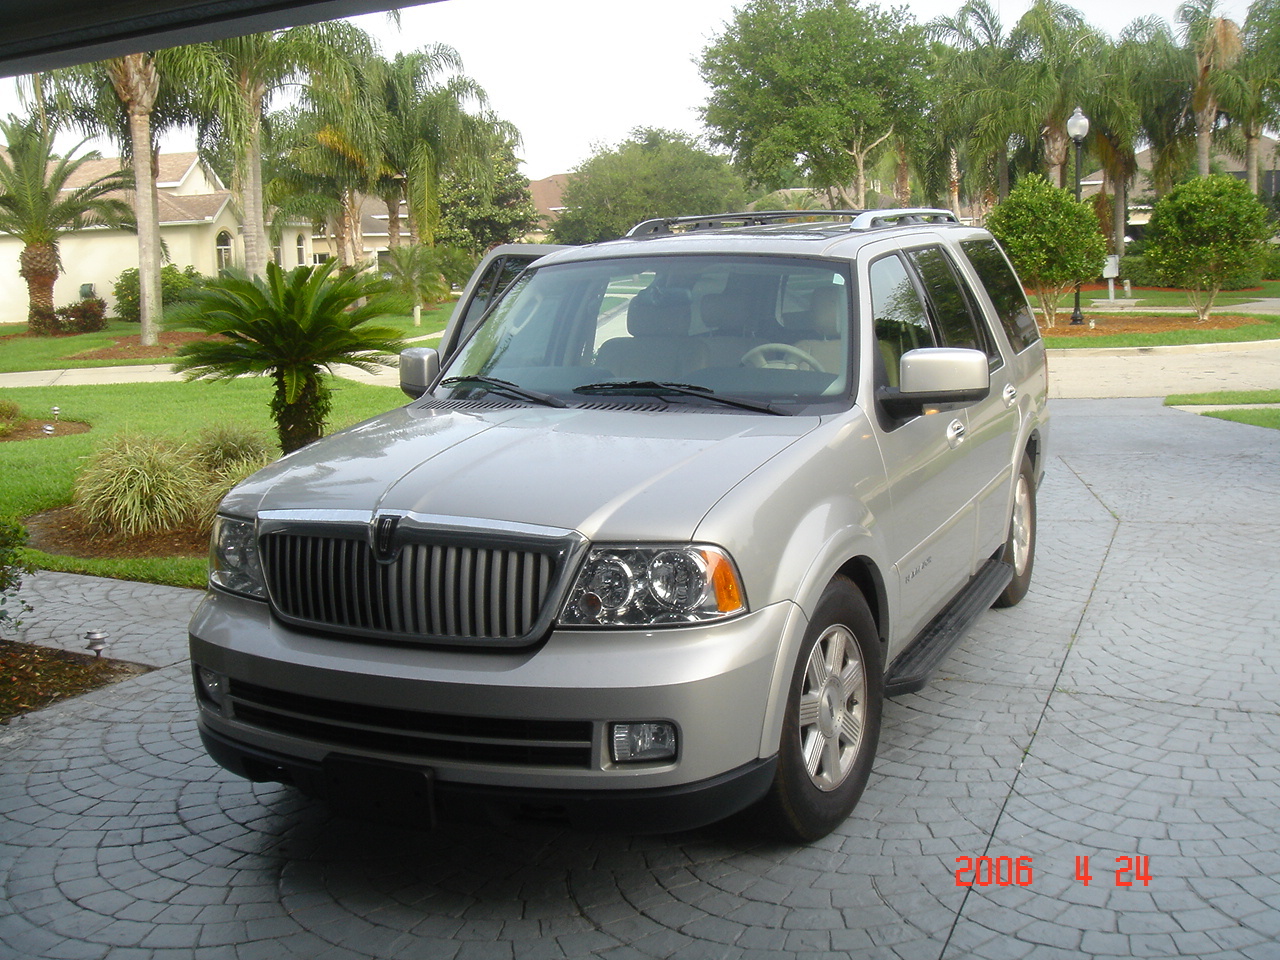 2005 Lincoln Navigator: Prices, Reviews & Pictures - CarGurus